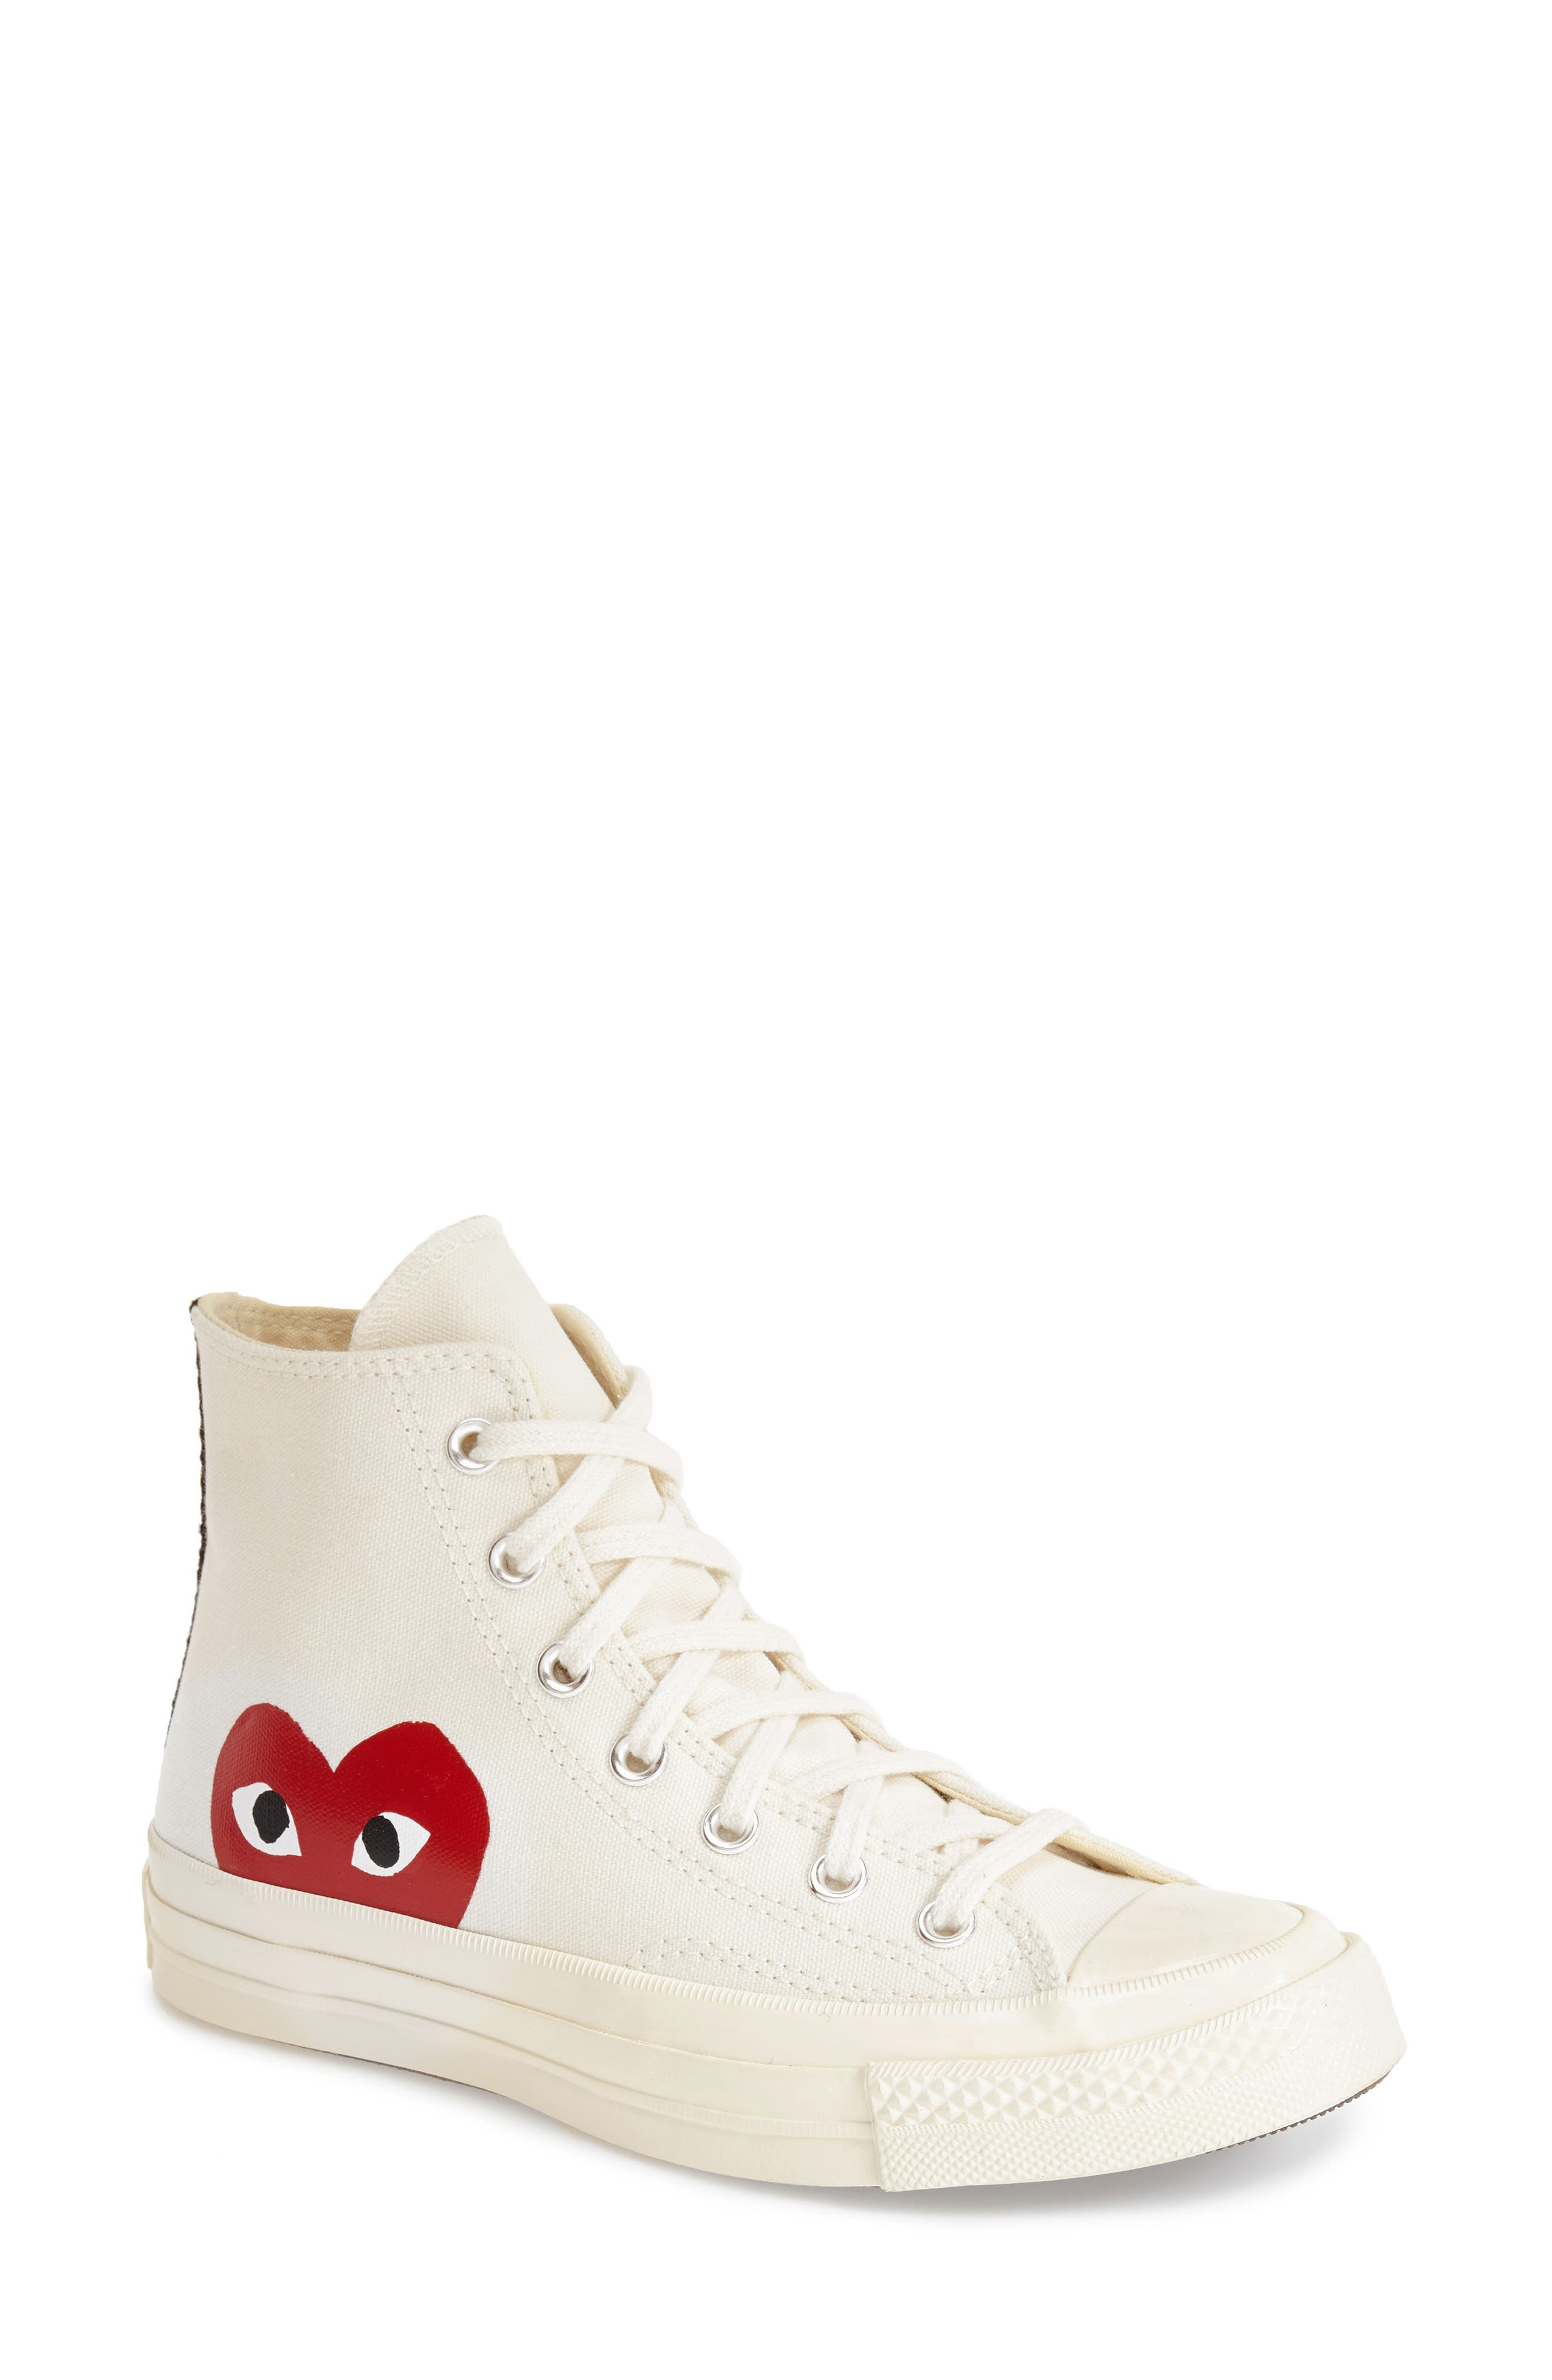 cdg converse womens size 5